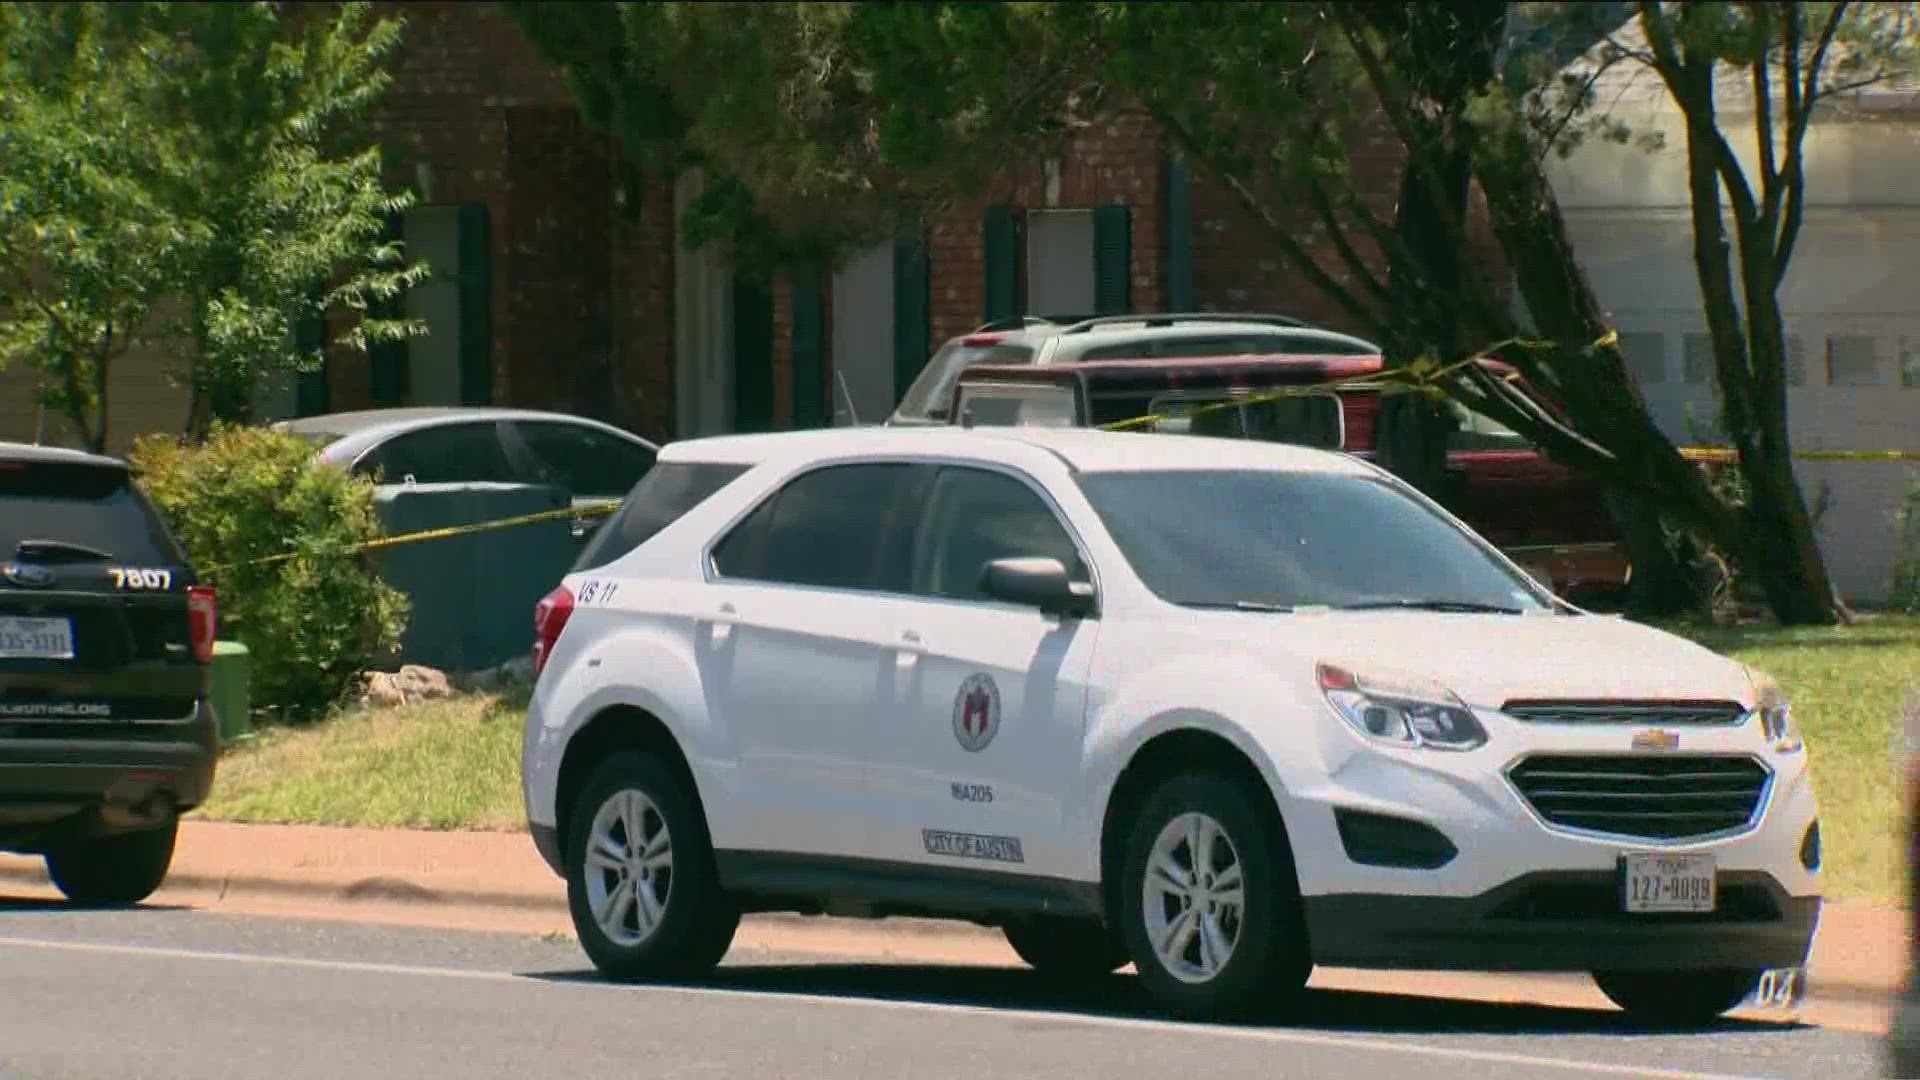 Police are investigating a shooting that left two people dead in northwest Austin.